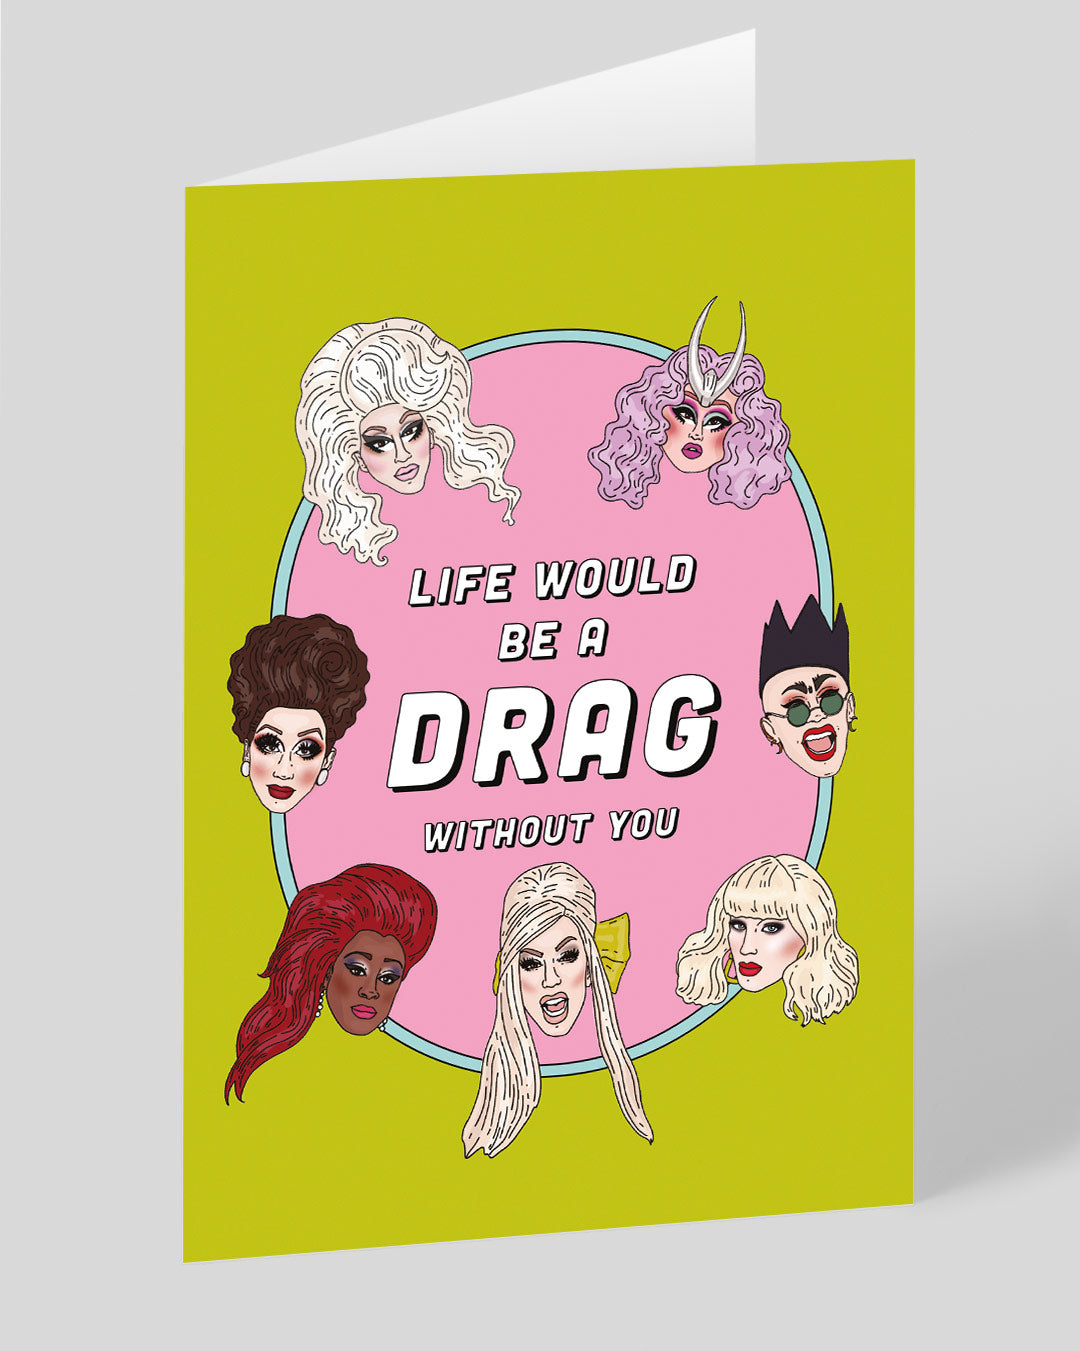 Valentine’s Day | Funny Valentines Card For Ru Pauls Drag Race Fans | Life Would Be A Drag Greeting Card | Ohh Deer Unique Valentine’s Card for Him or Her | Made In The UK, Eco-Friendly Materials, Plastic Free Packaging